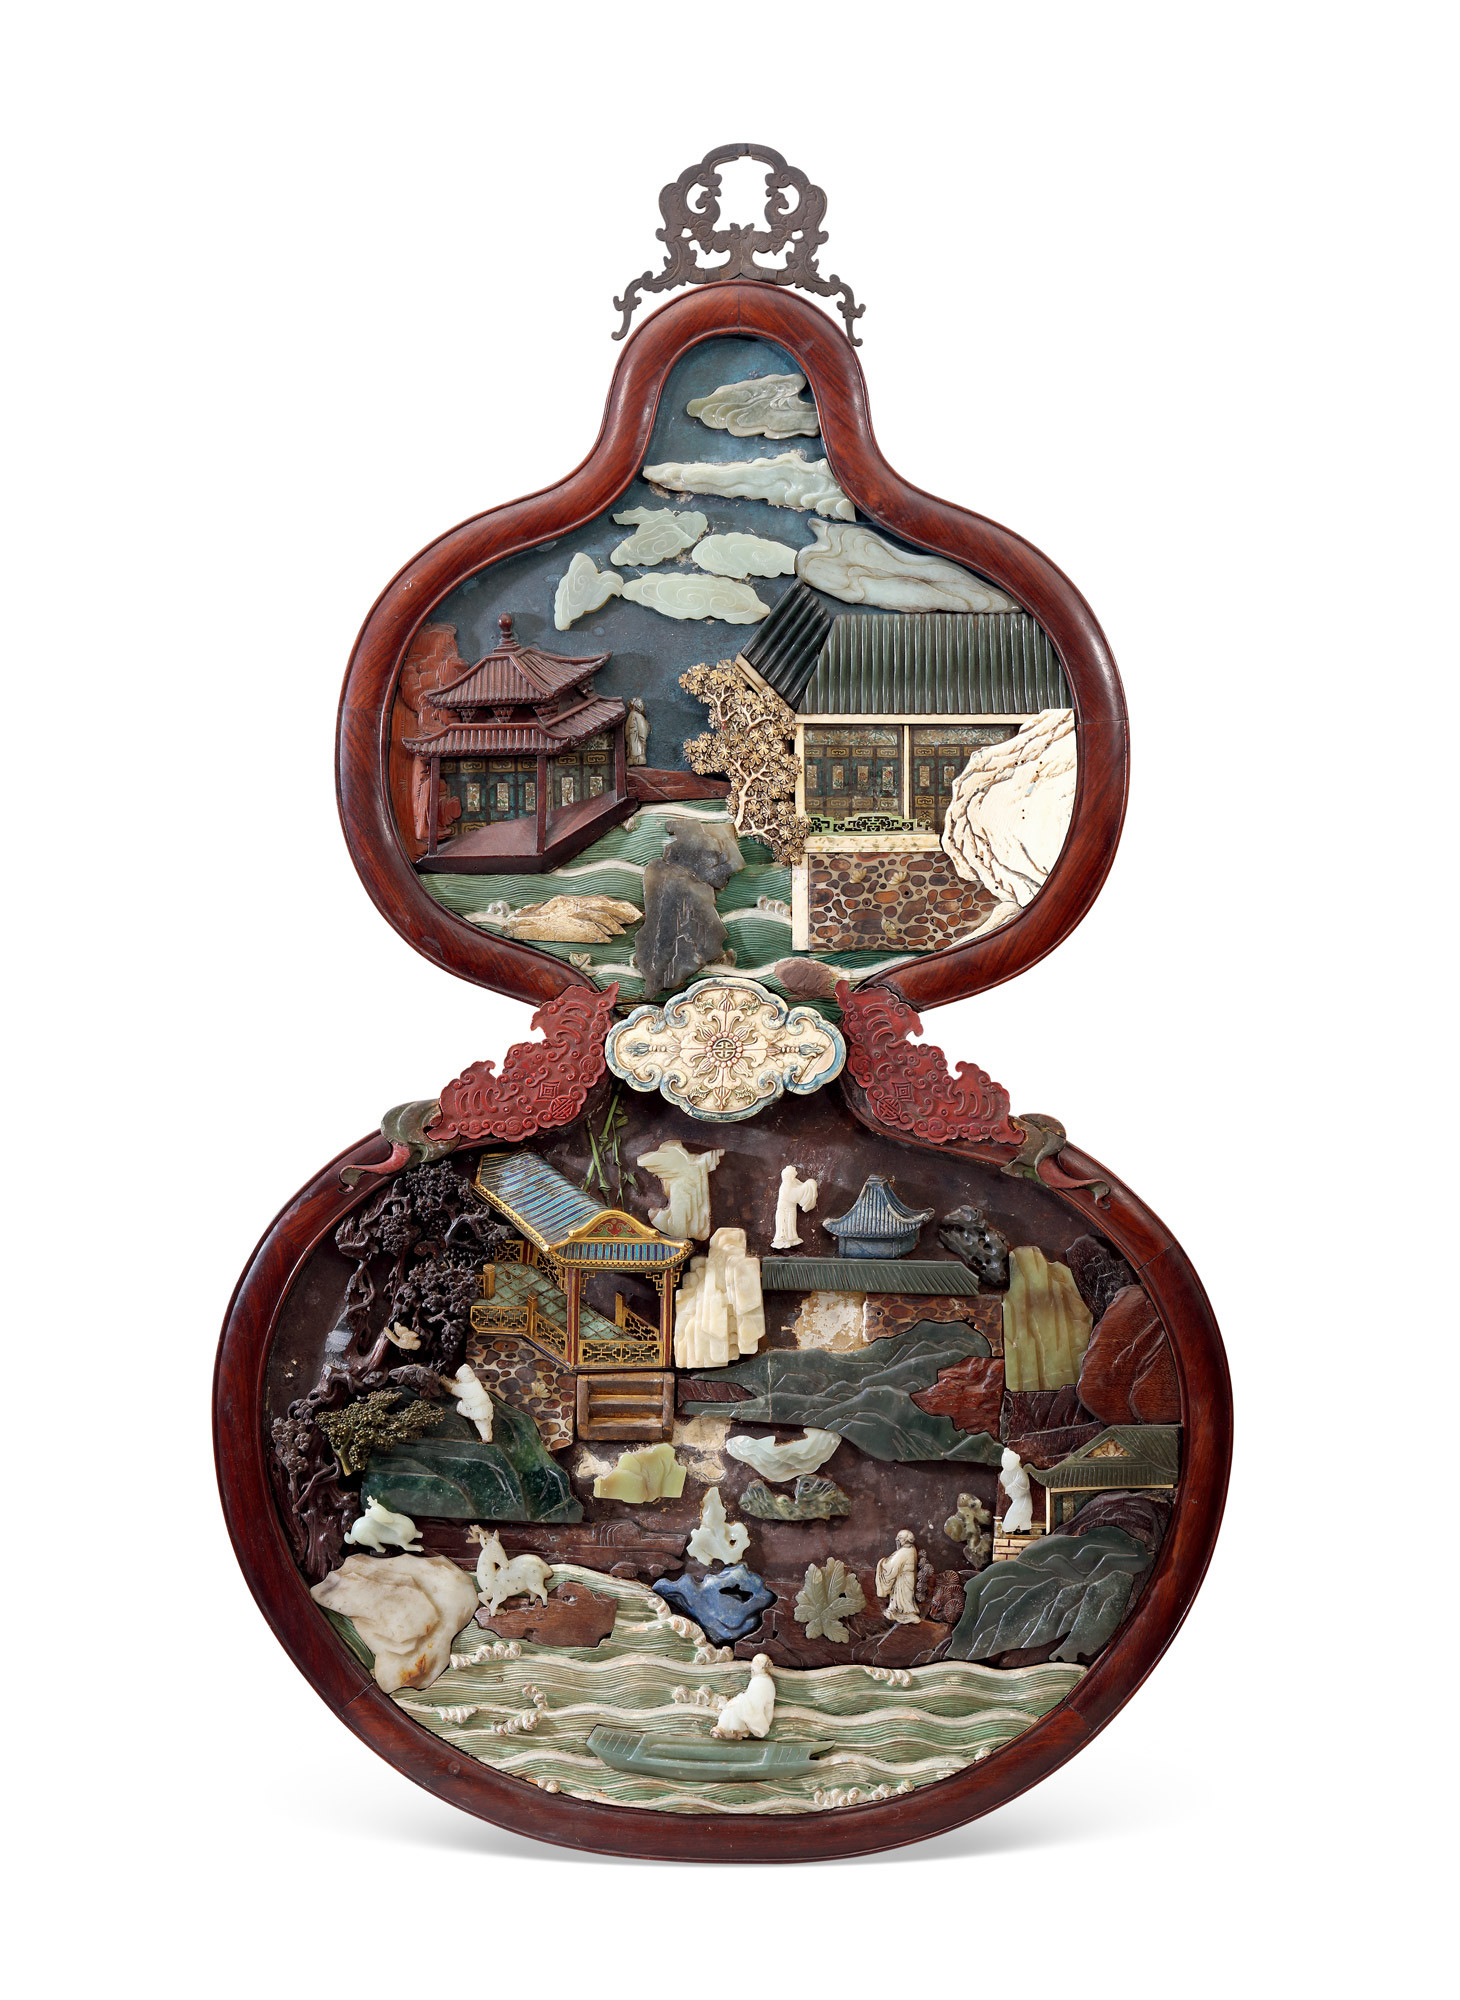 AN IMPORTANT AND IMPERIAL GOURD-SHAPED INLAID JADE AND MARBLE HANGING SCREEN